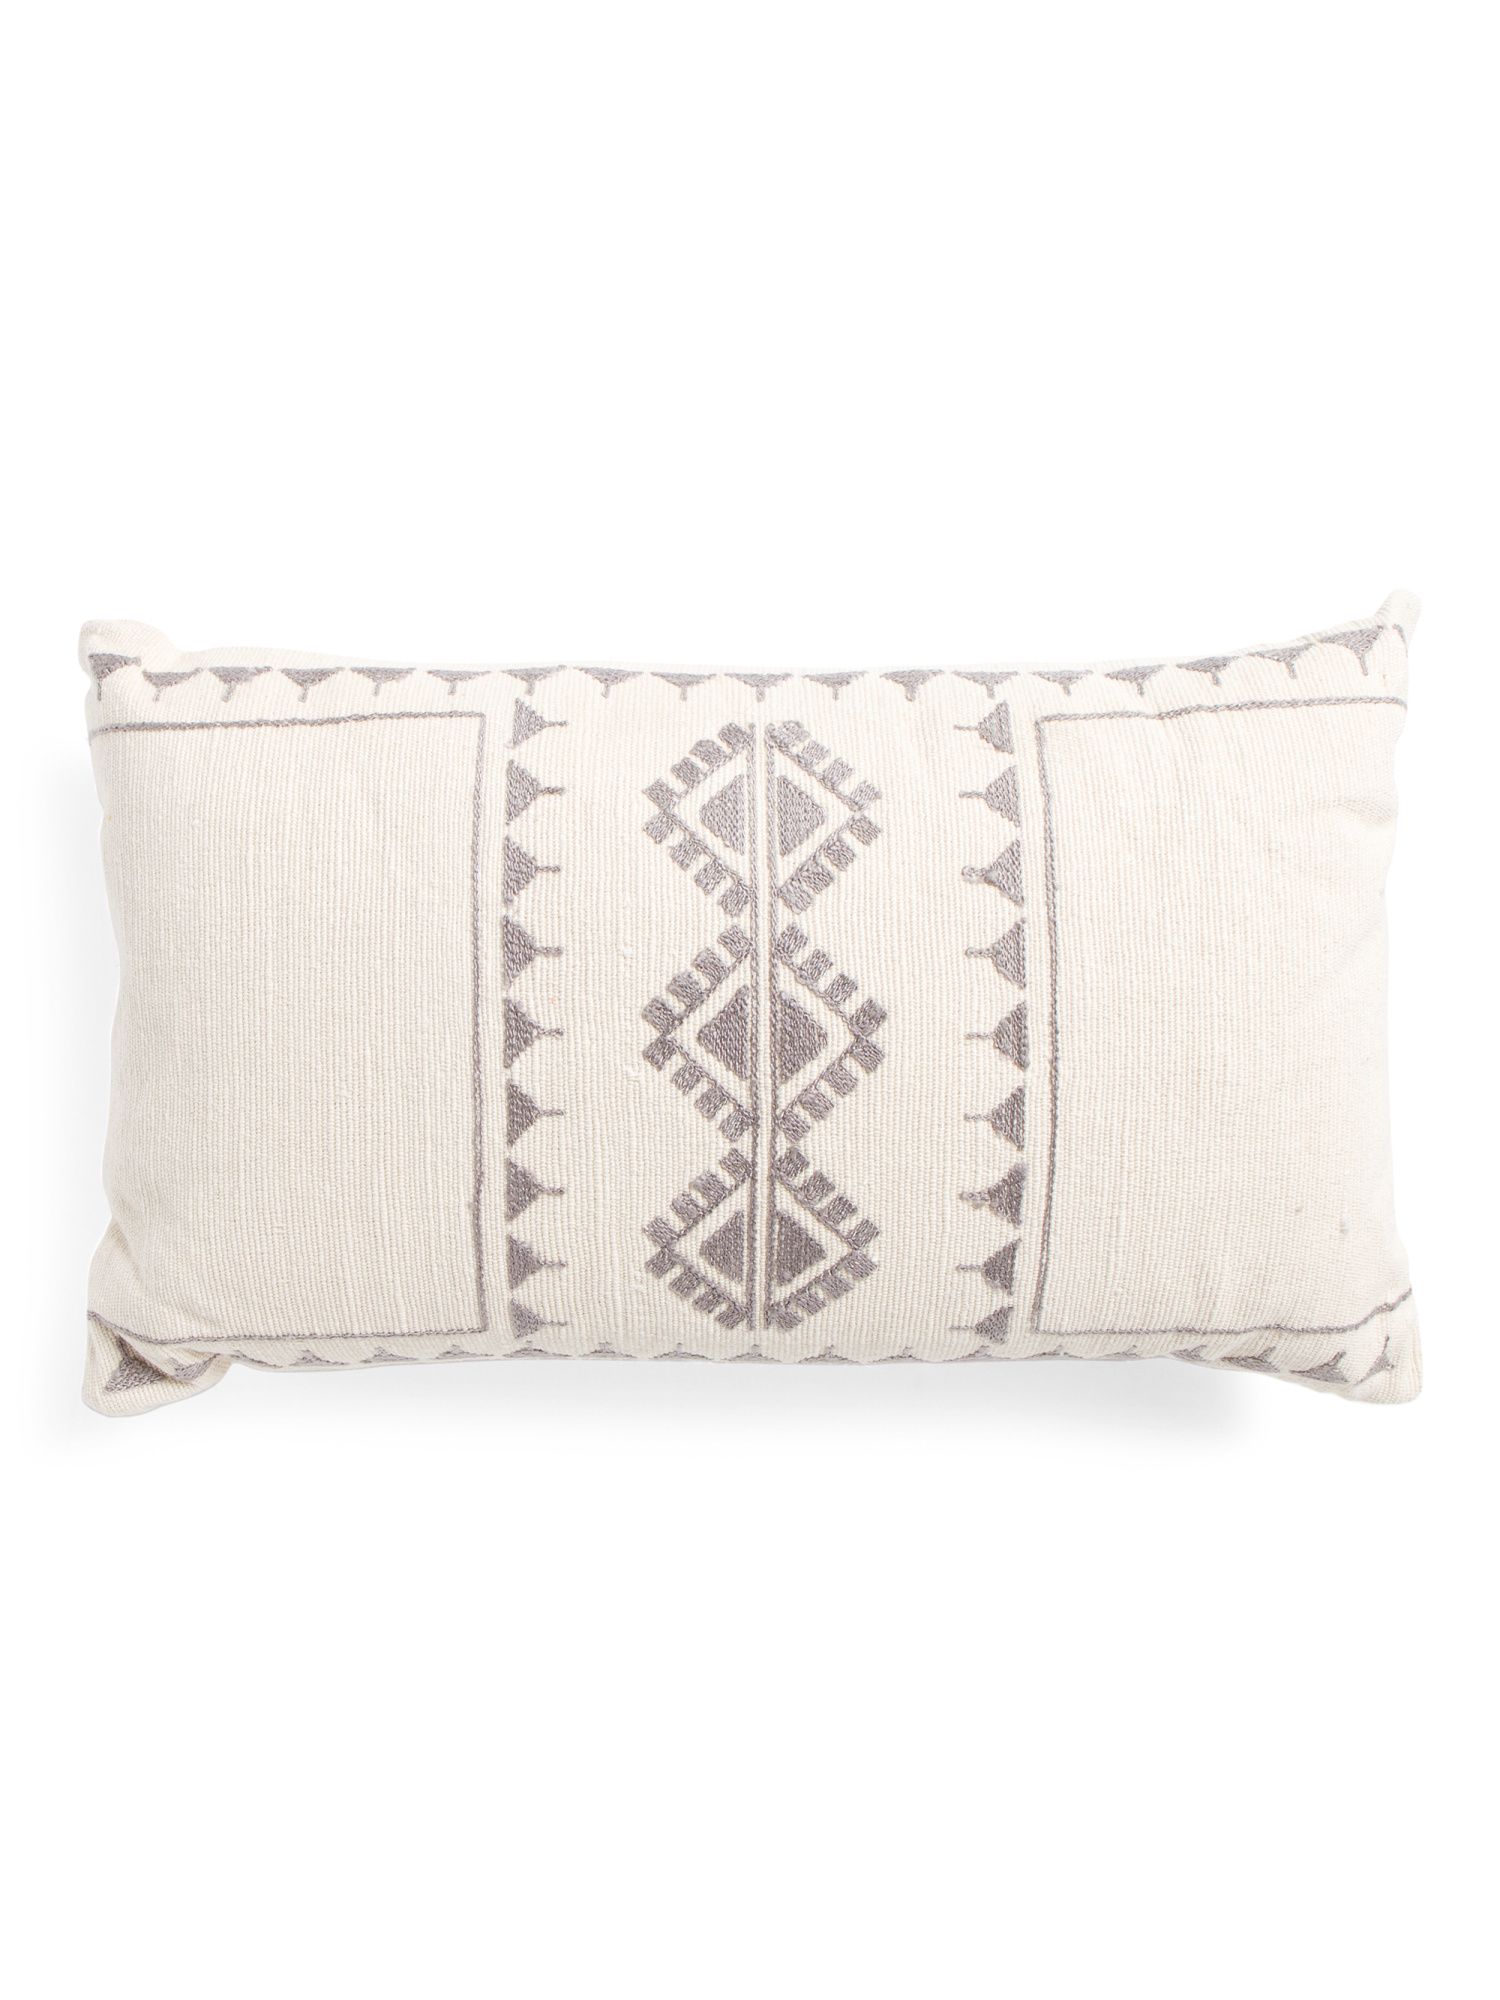 16x26 Oversized Embroidered Pillow | TJ Maxx